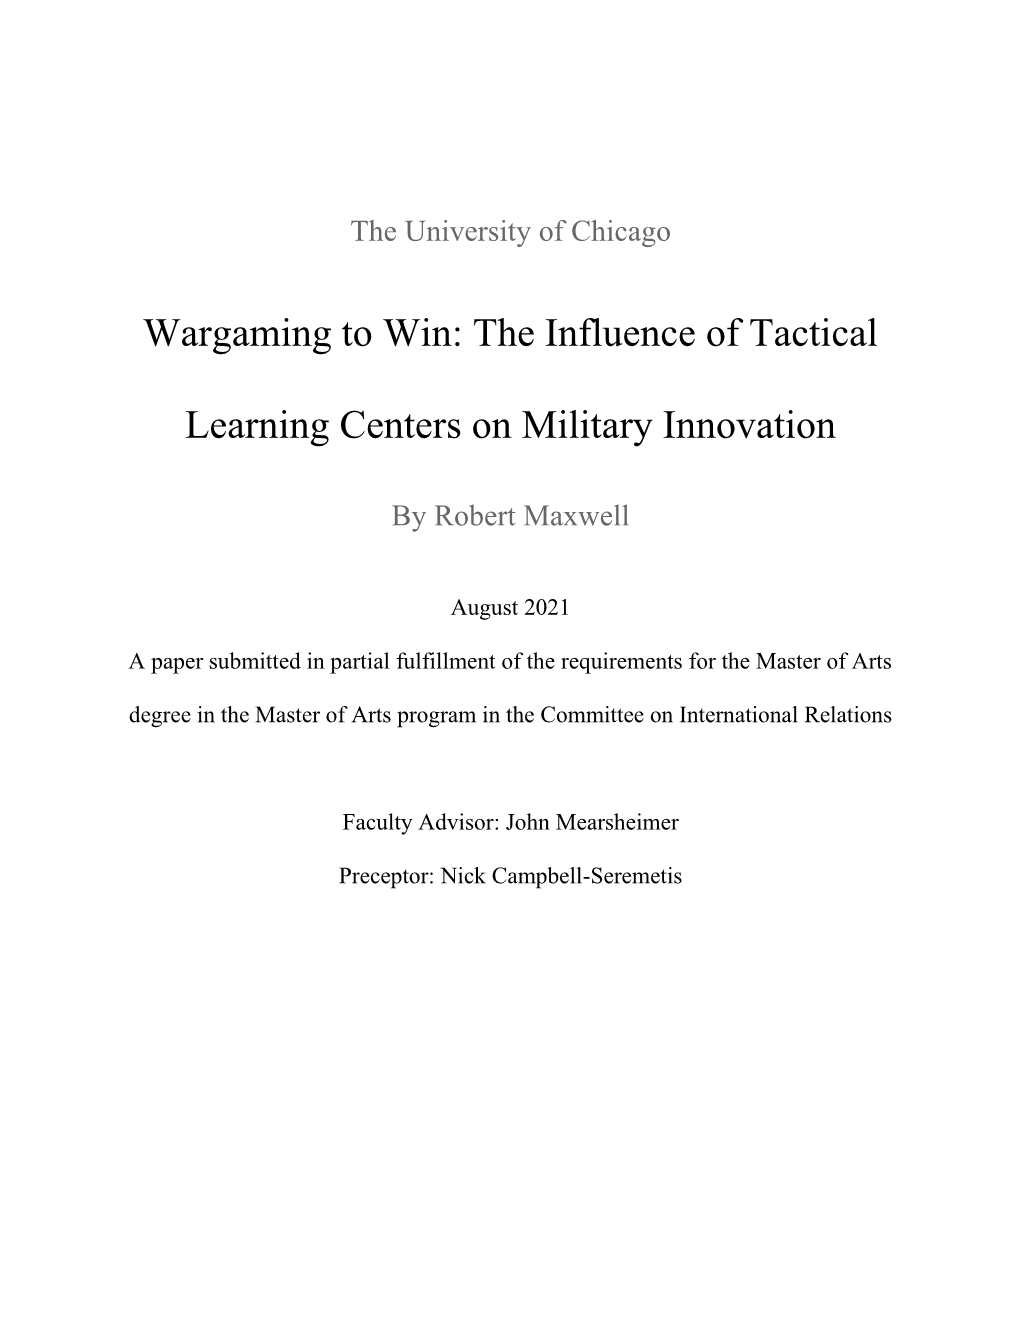 The Influence of Tactical Learning Centers on Military Innovation